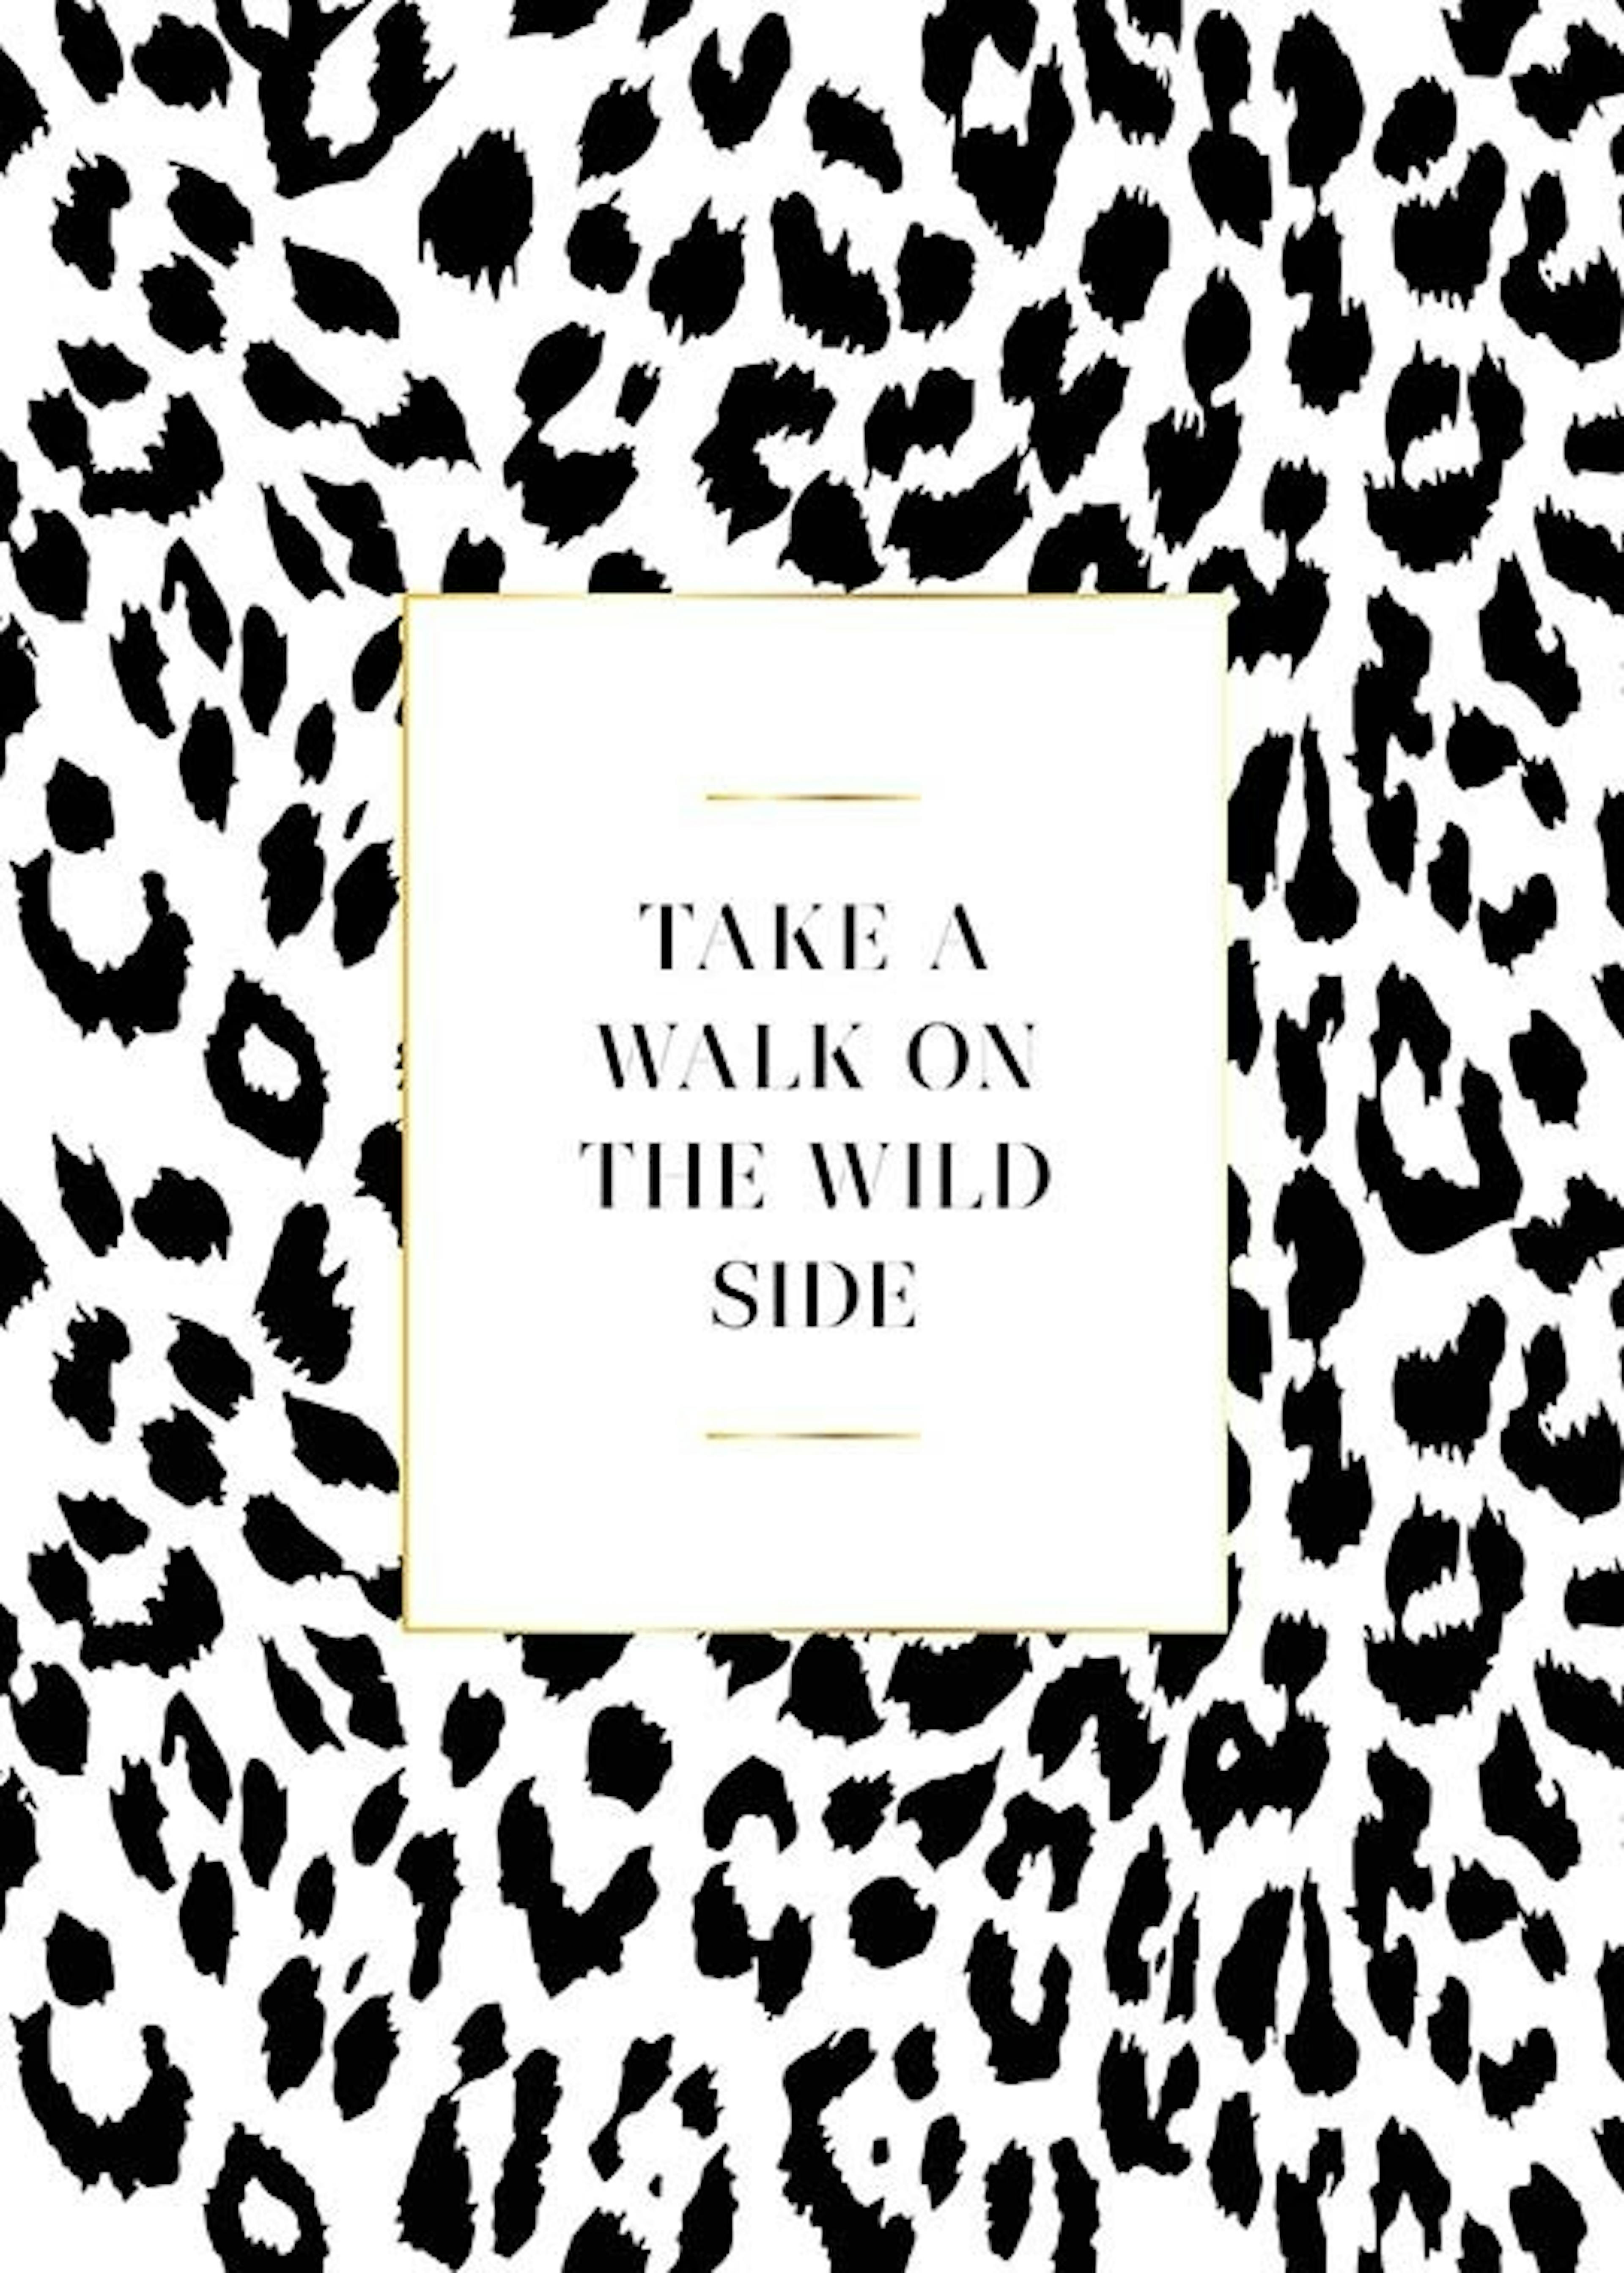 On The Wild Side Print